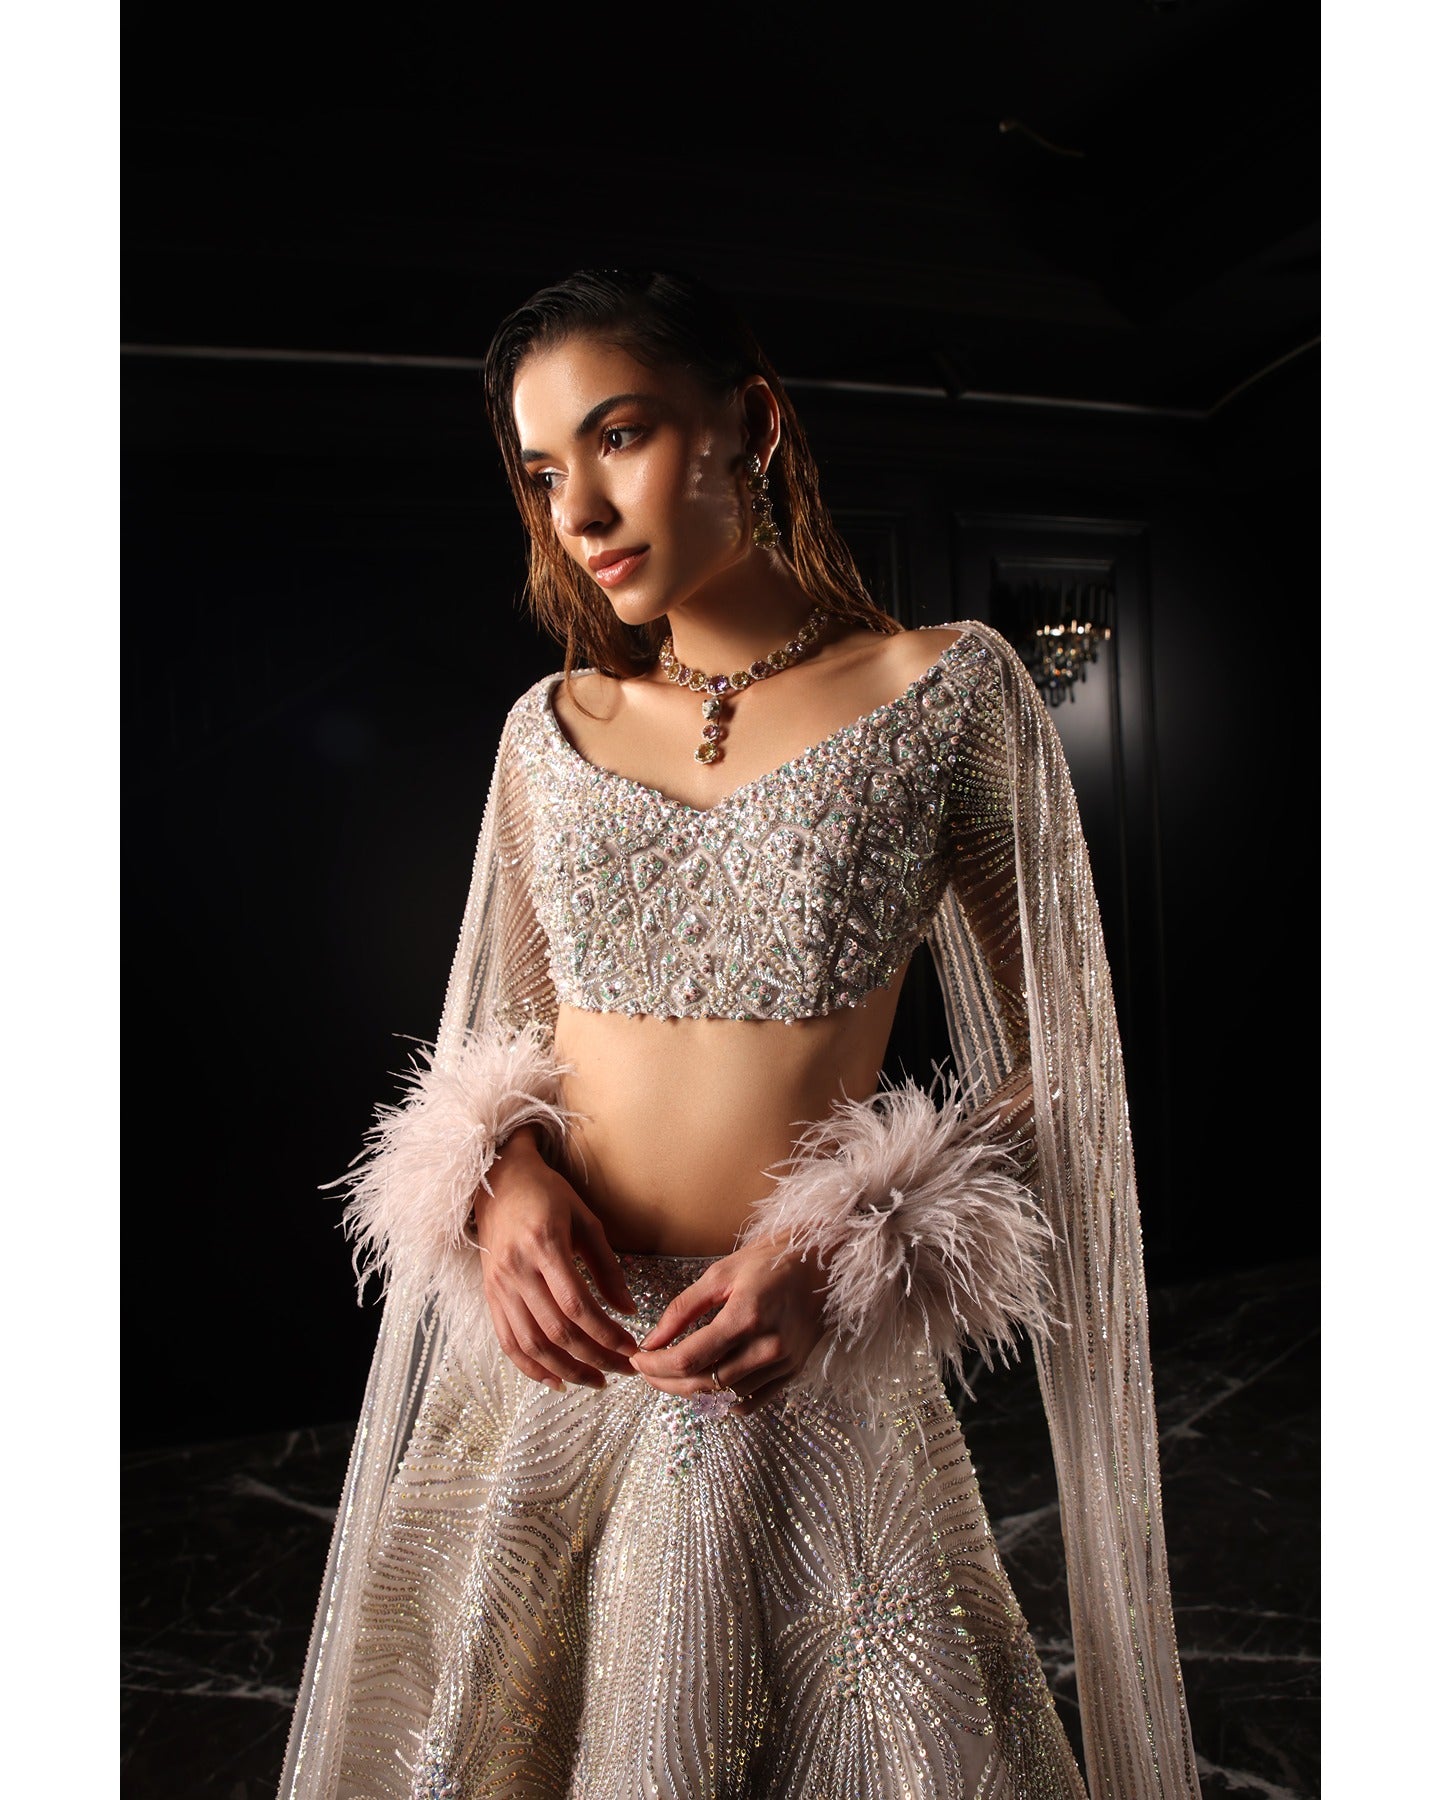 Drenched in lilac sophistication, the Orave lehenga captivates with its V-neck choli blouse and two shoulder trails embellished with Swarovski crystals, feathers, and sequins.